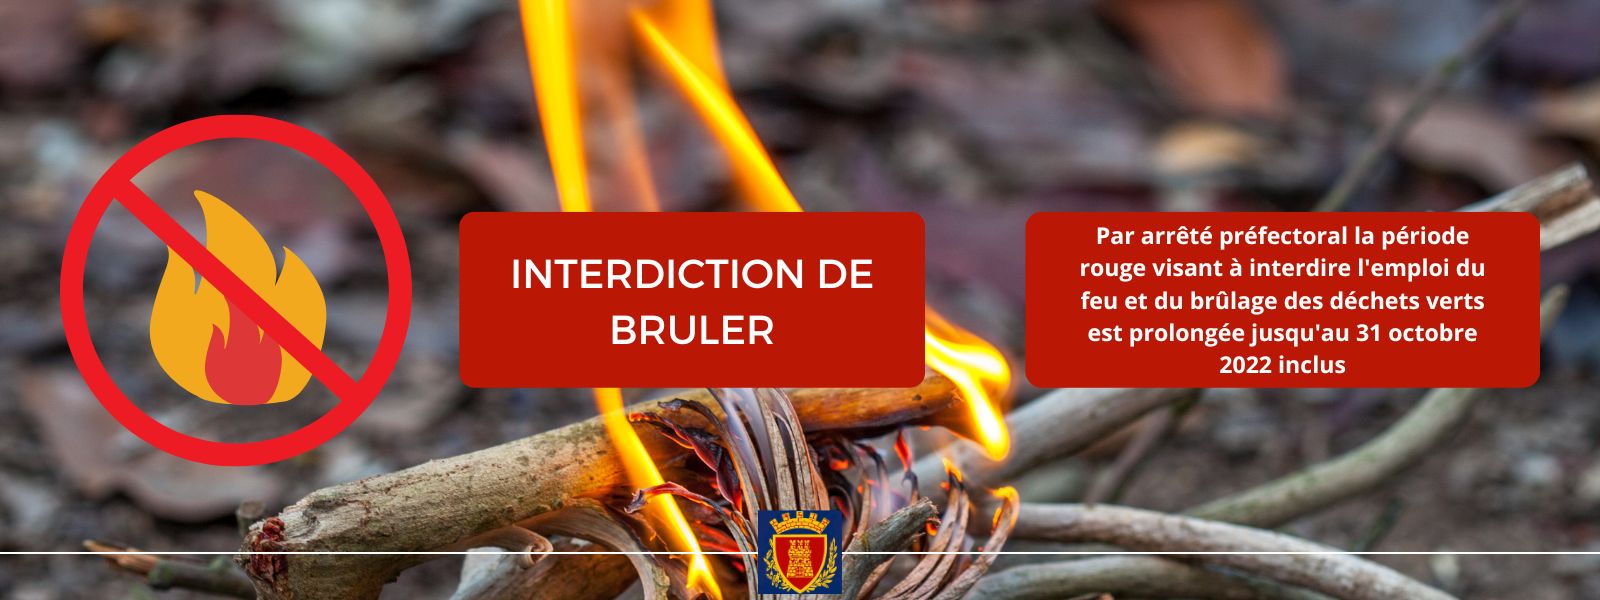 Ban on the use of fire until October 31, 2022